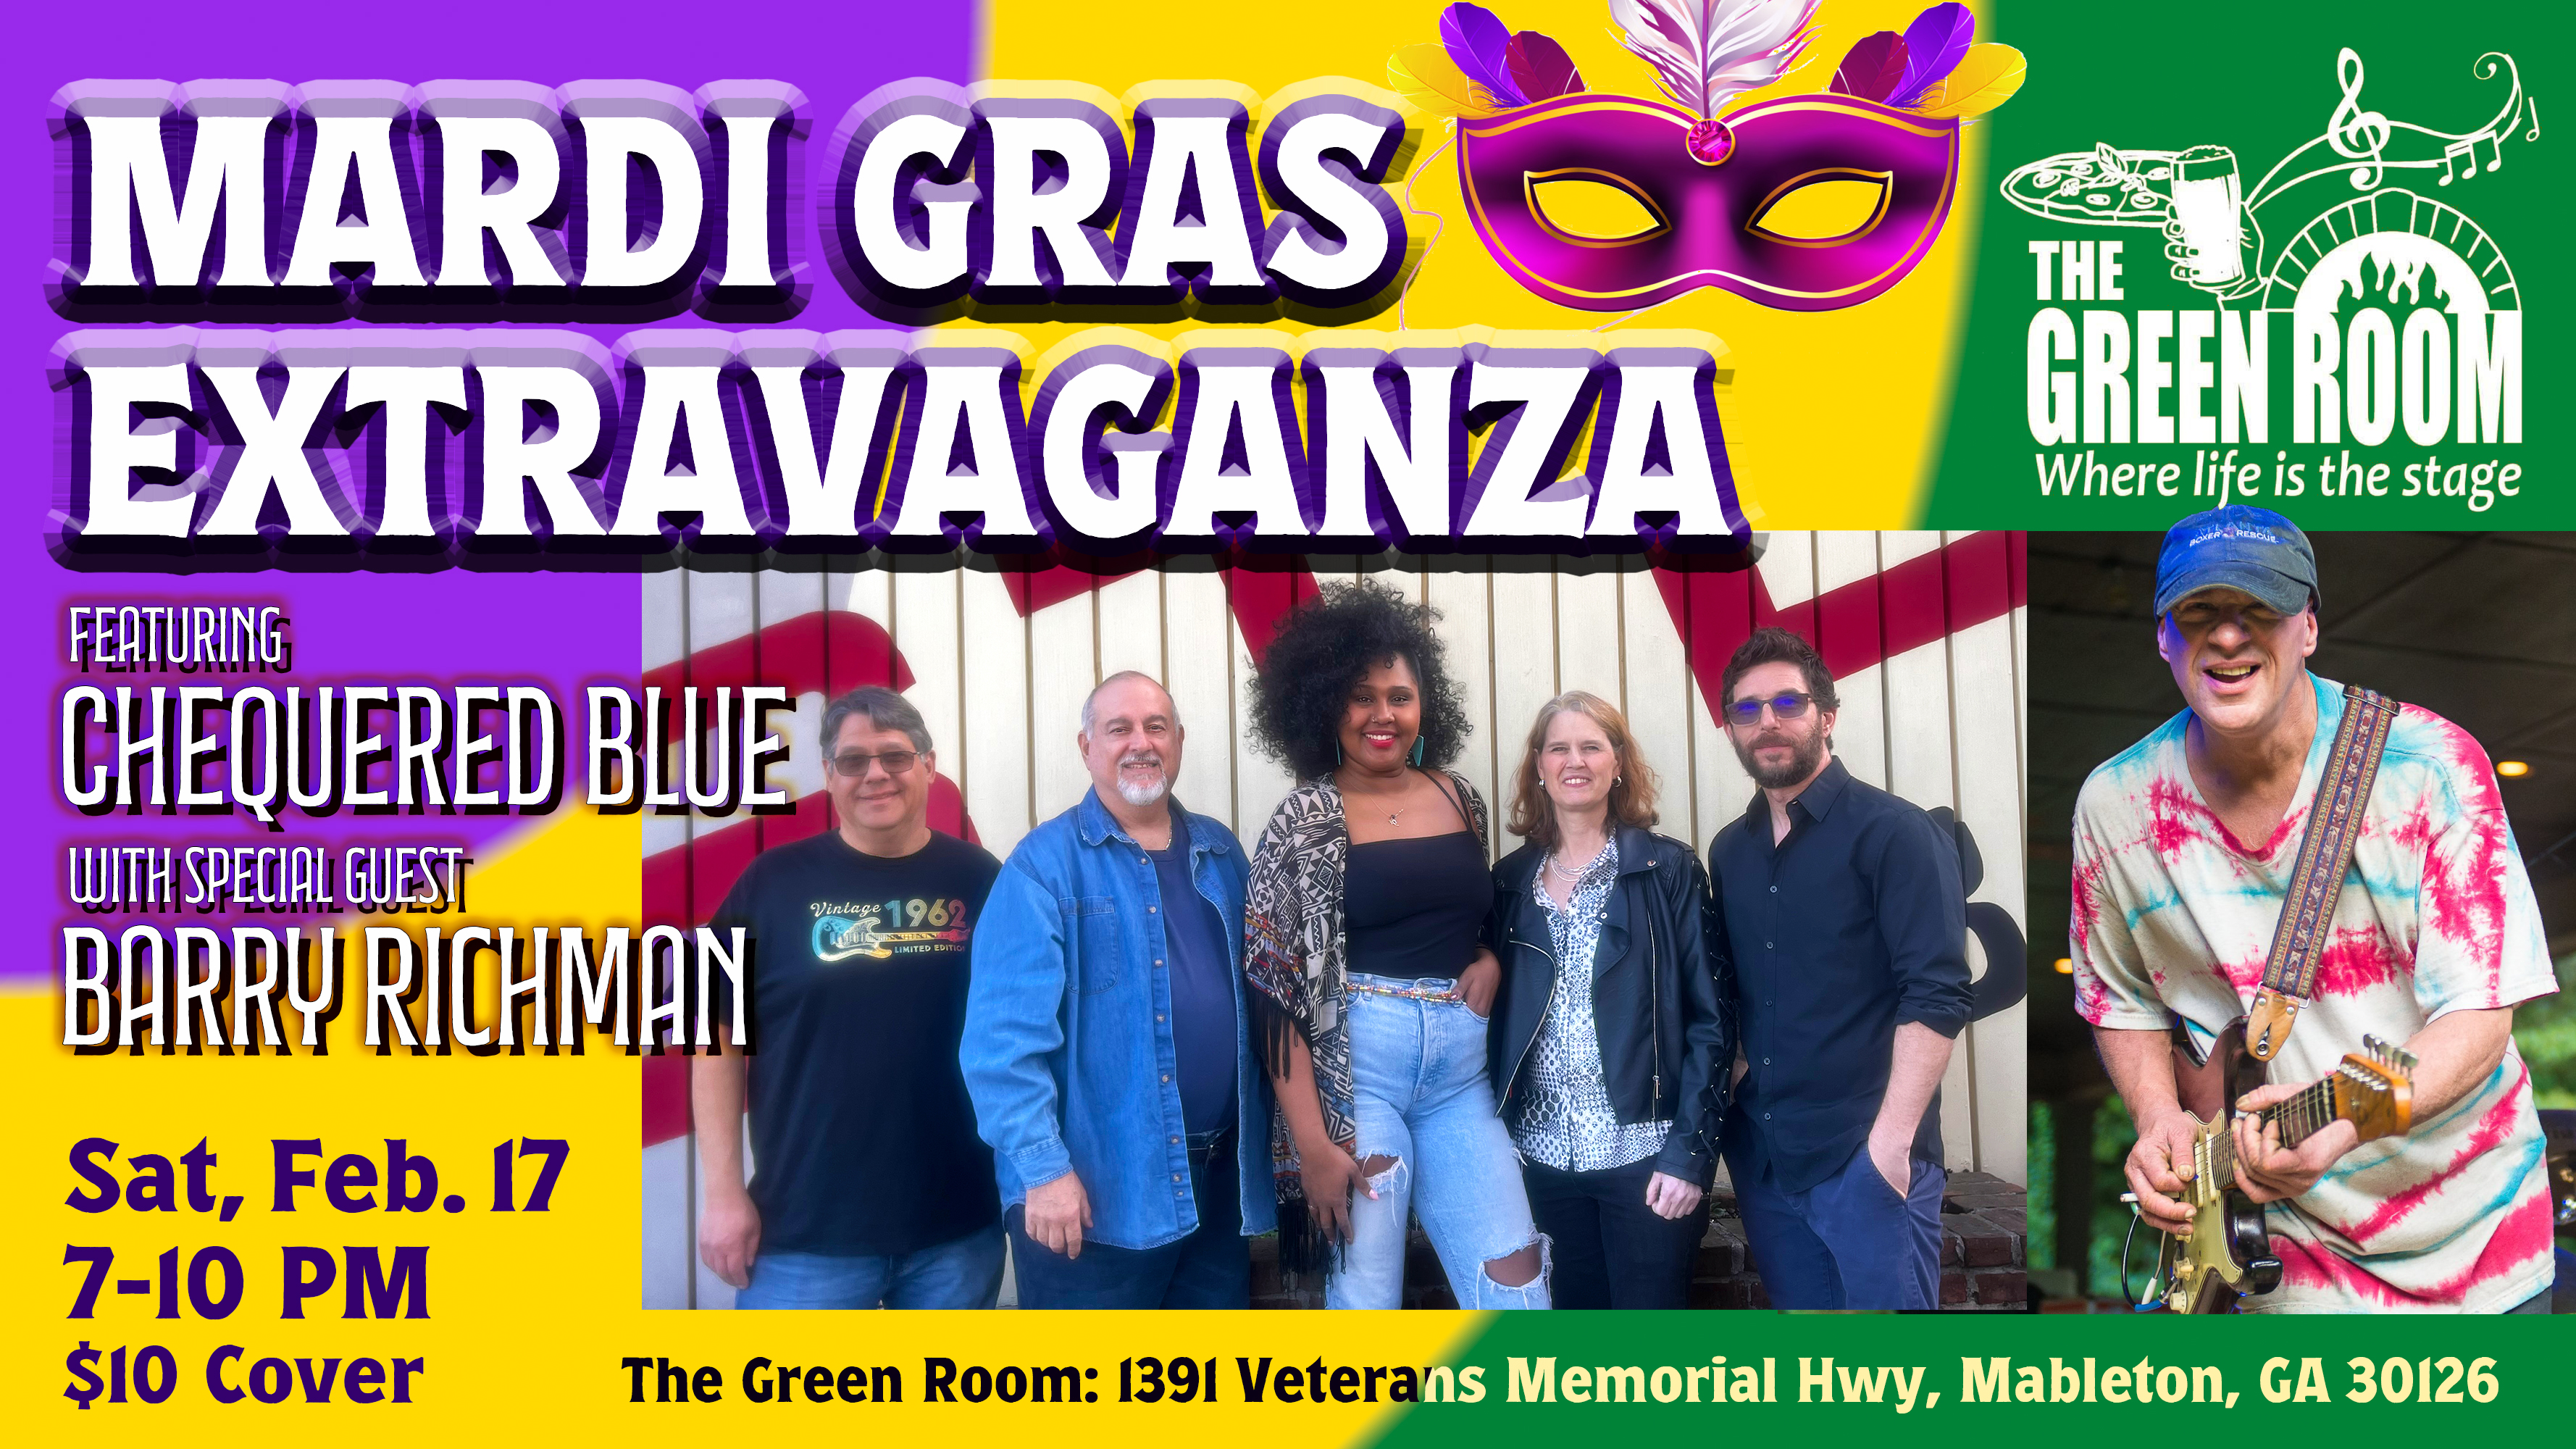 Mardi Gras Extravaganza featuring Chequered Blue with special guest Barry Richman. Sat. Feb 17, 2024 at The Green Room of Mableton